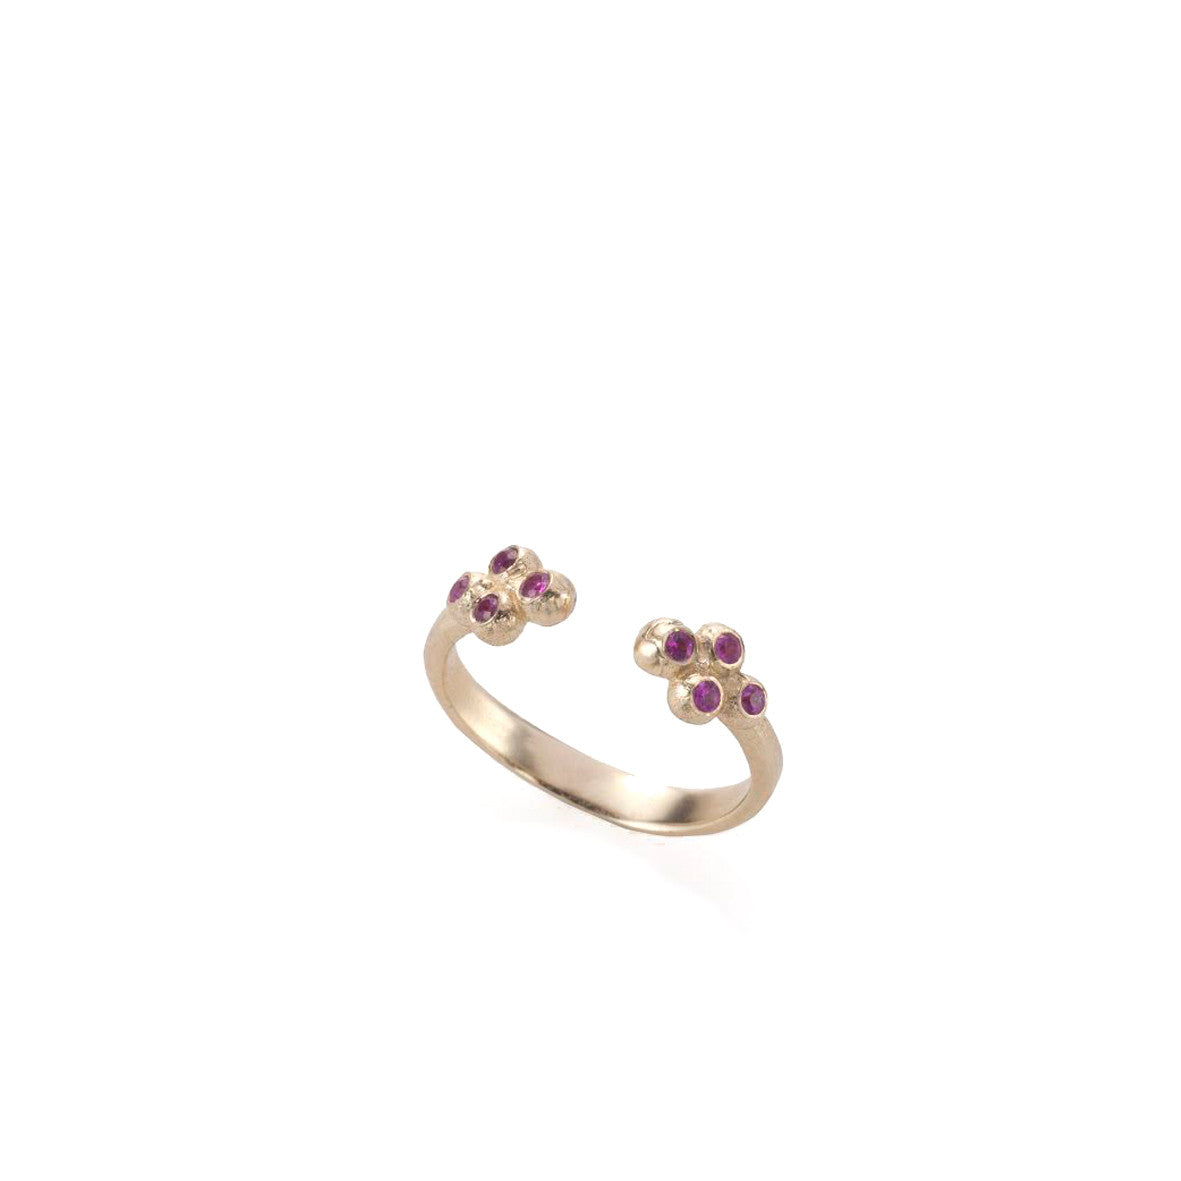 14k open gold ring with 8 rubies